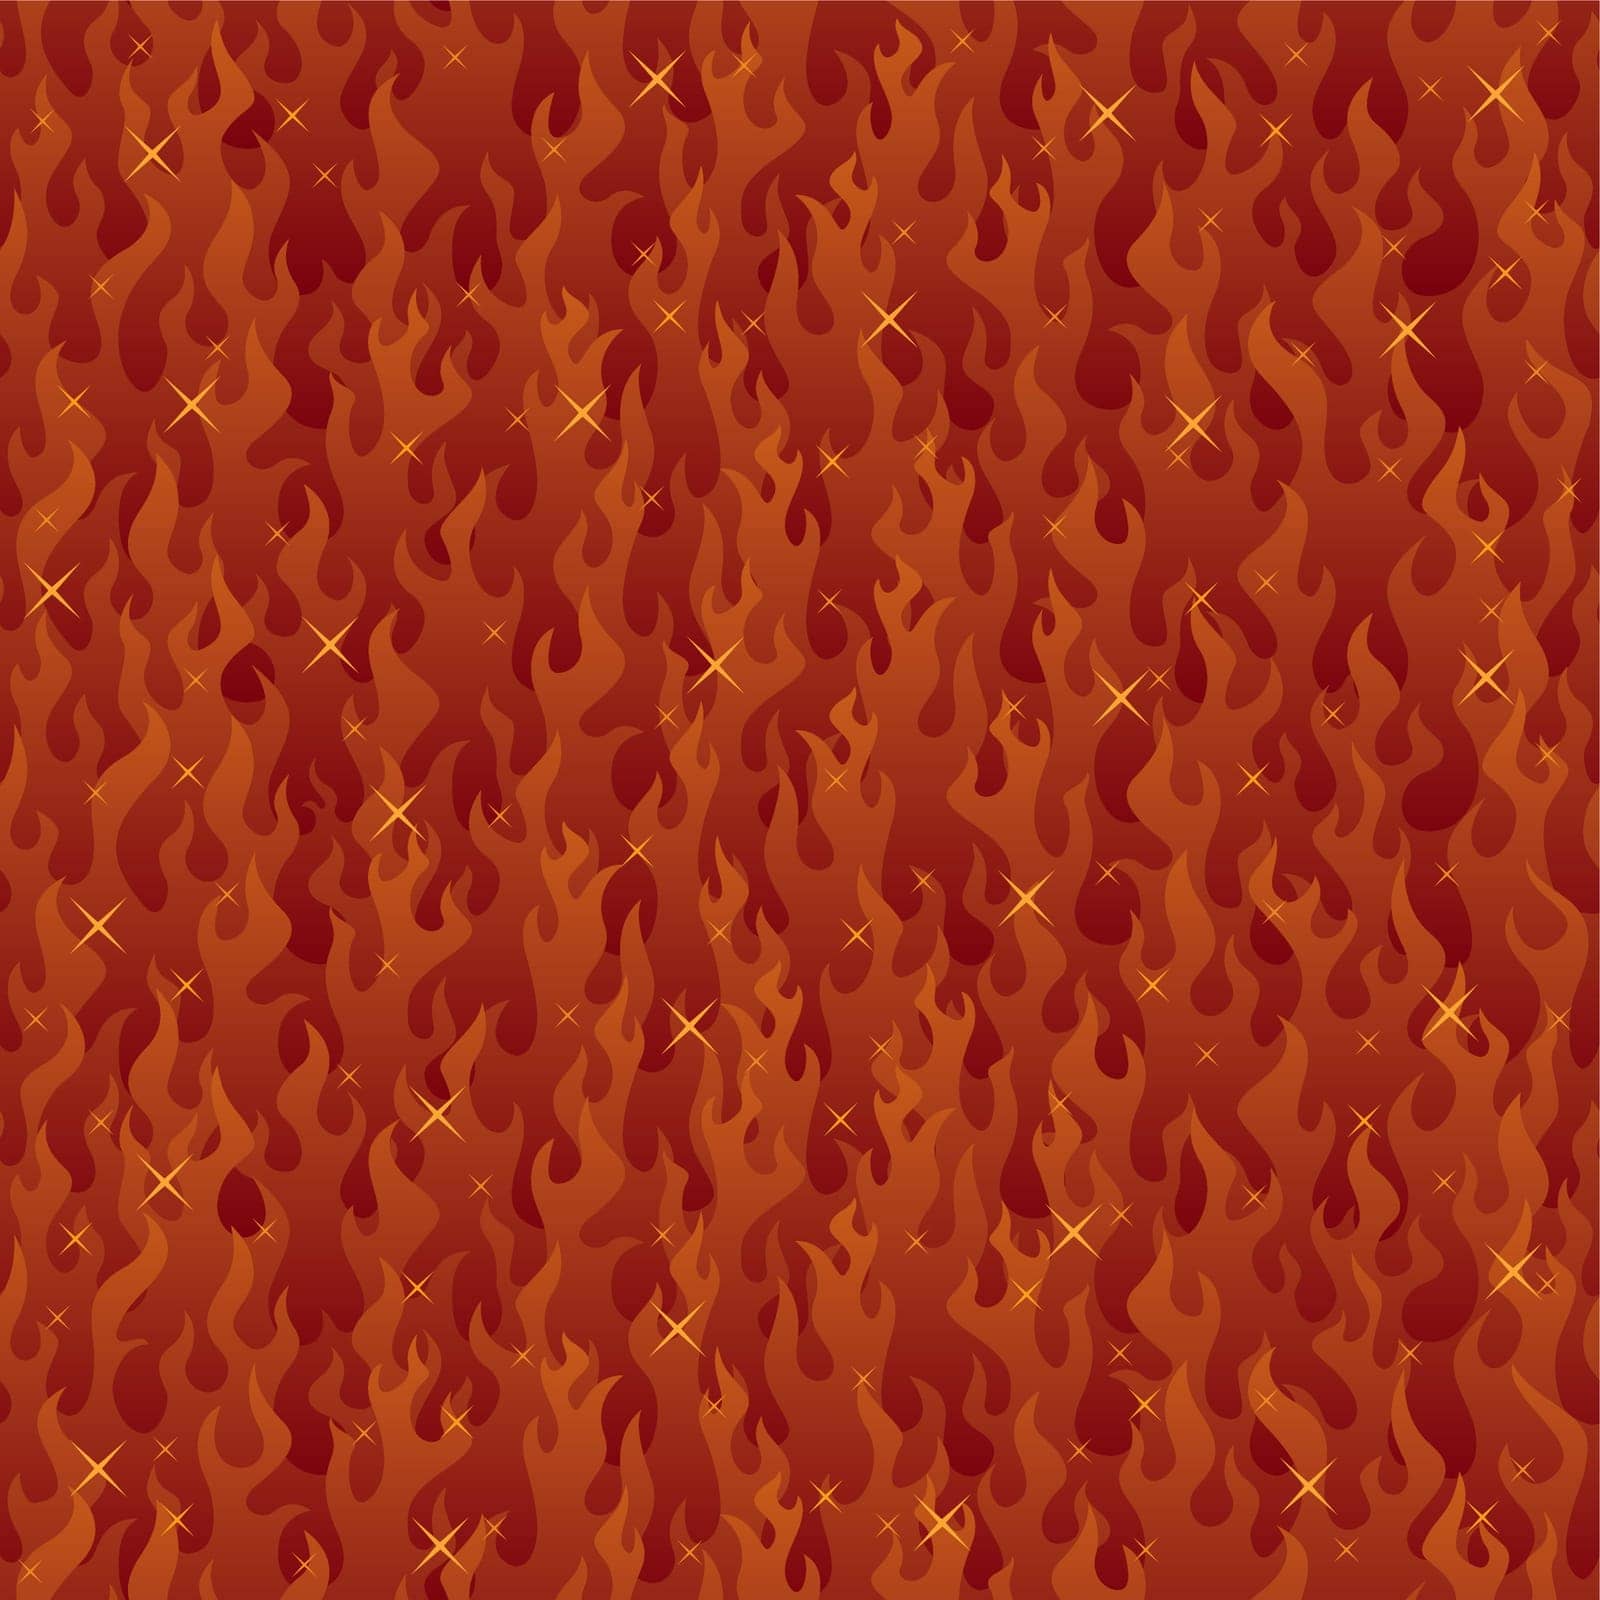 Seamless fire pattern.
No transparency used. Basic (linear) gradients used.

